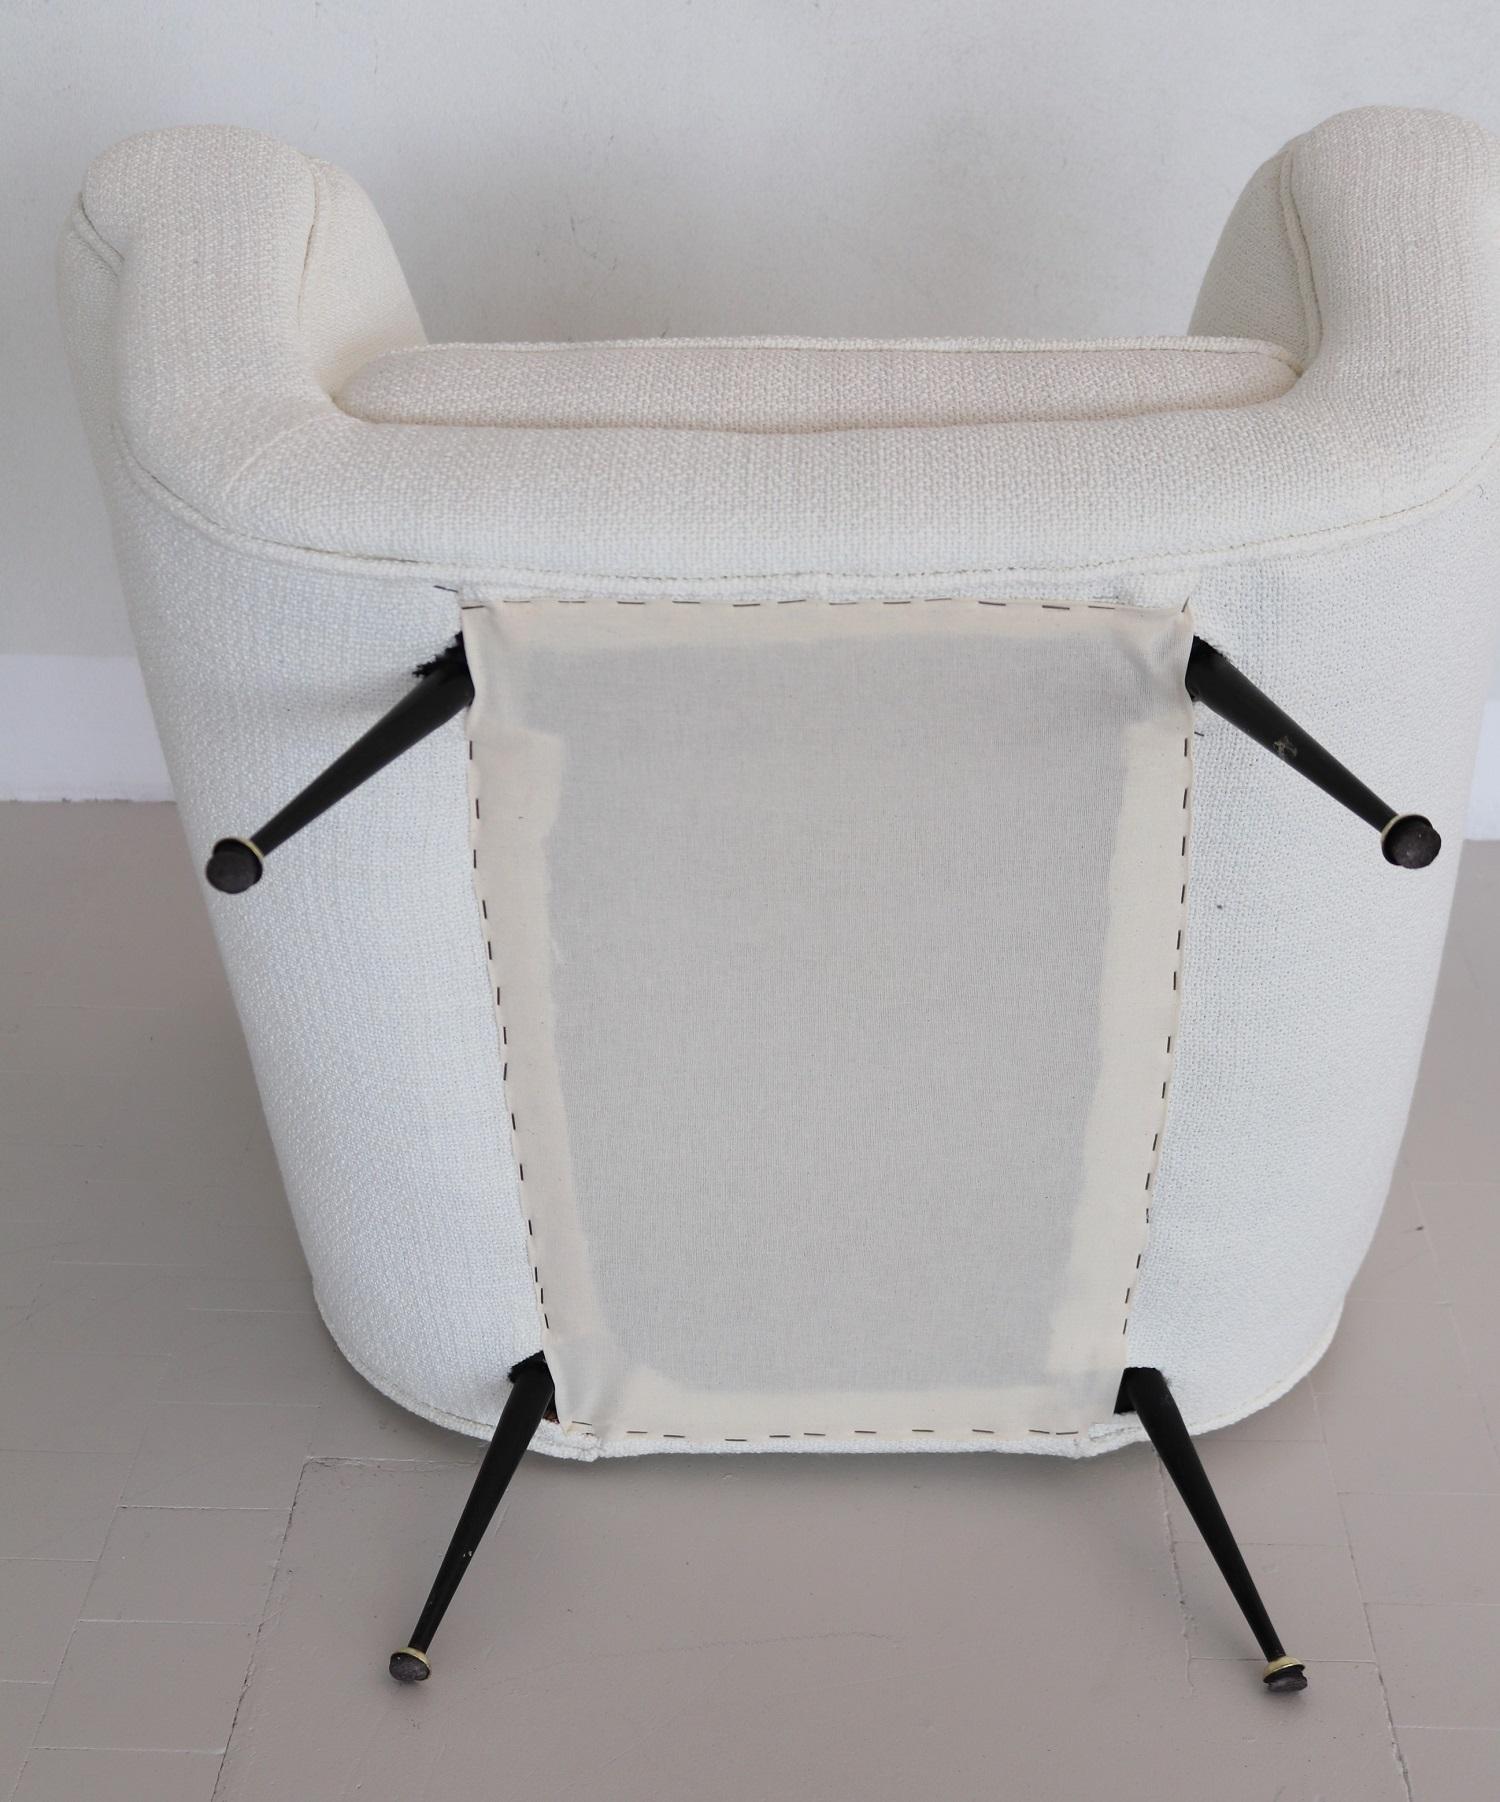 Italian Midcentury Armchairs in White Upholstery and Brass Stiletto Feet, 1960s For Sale 9